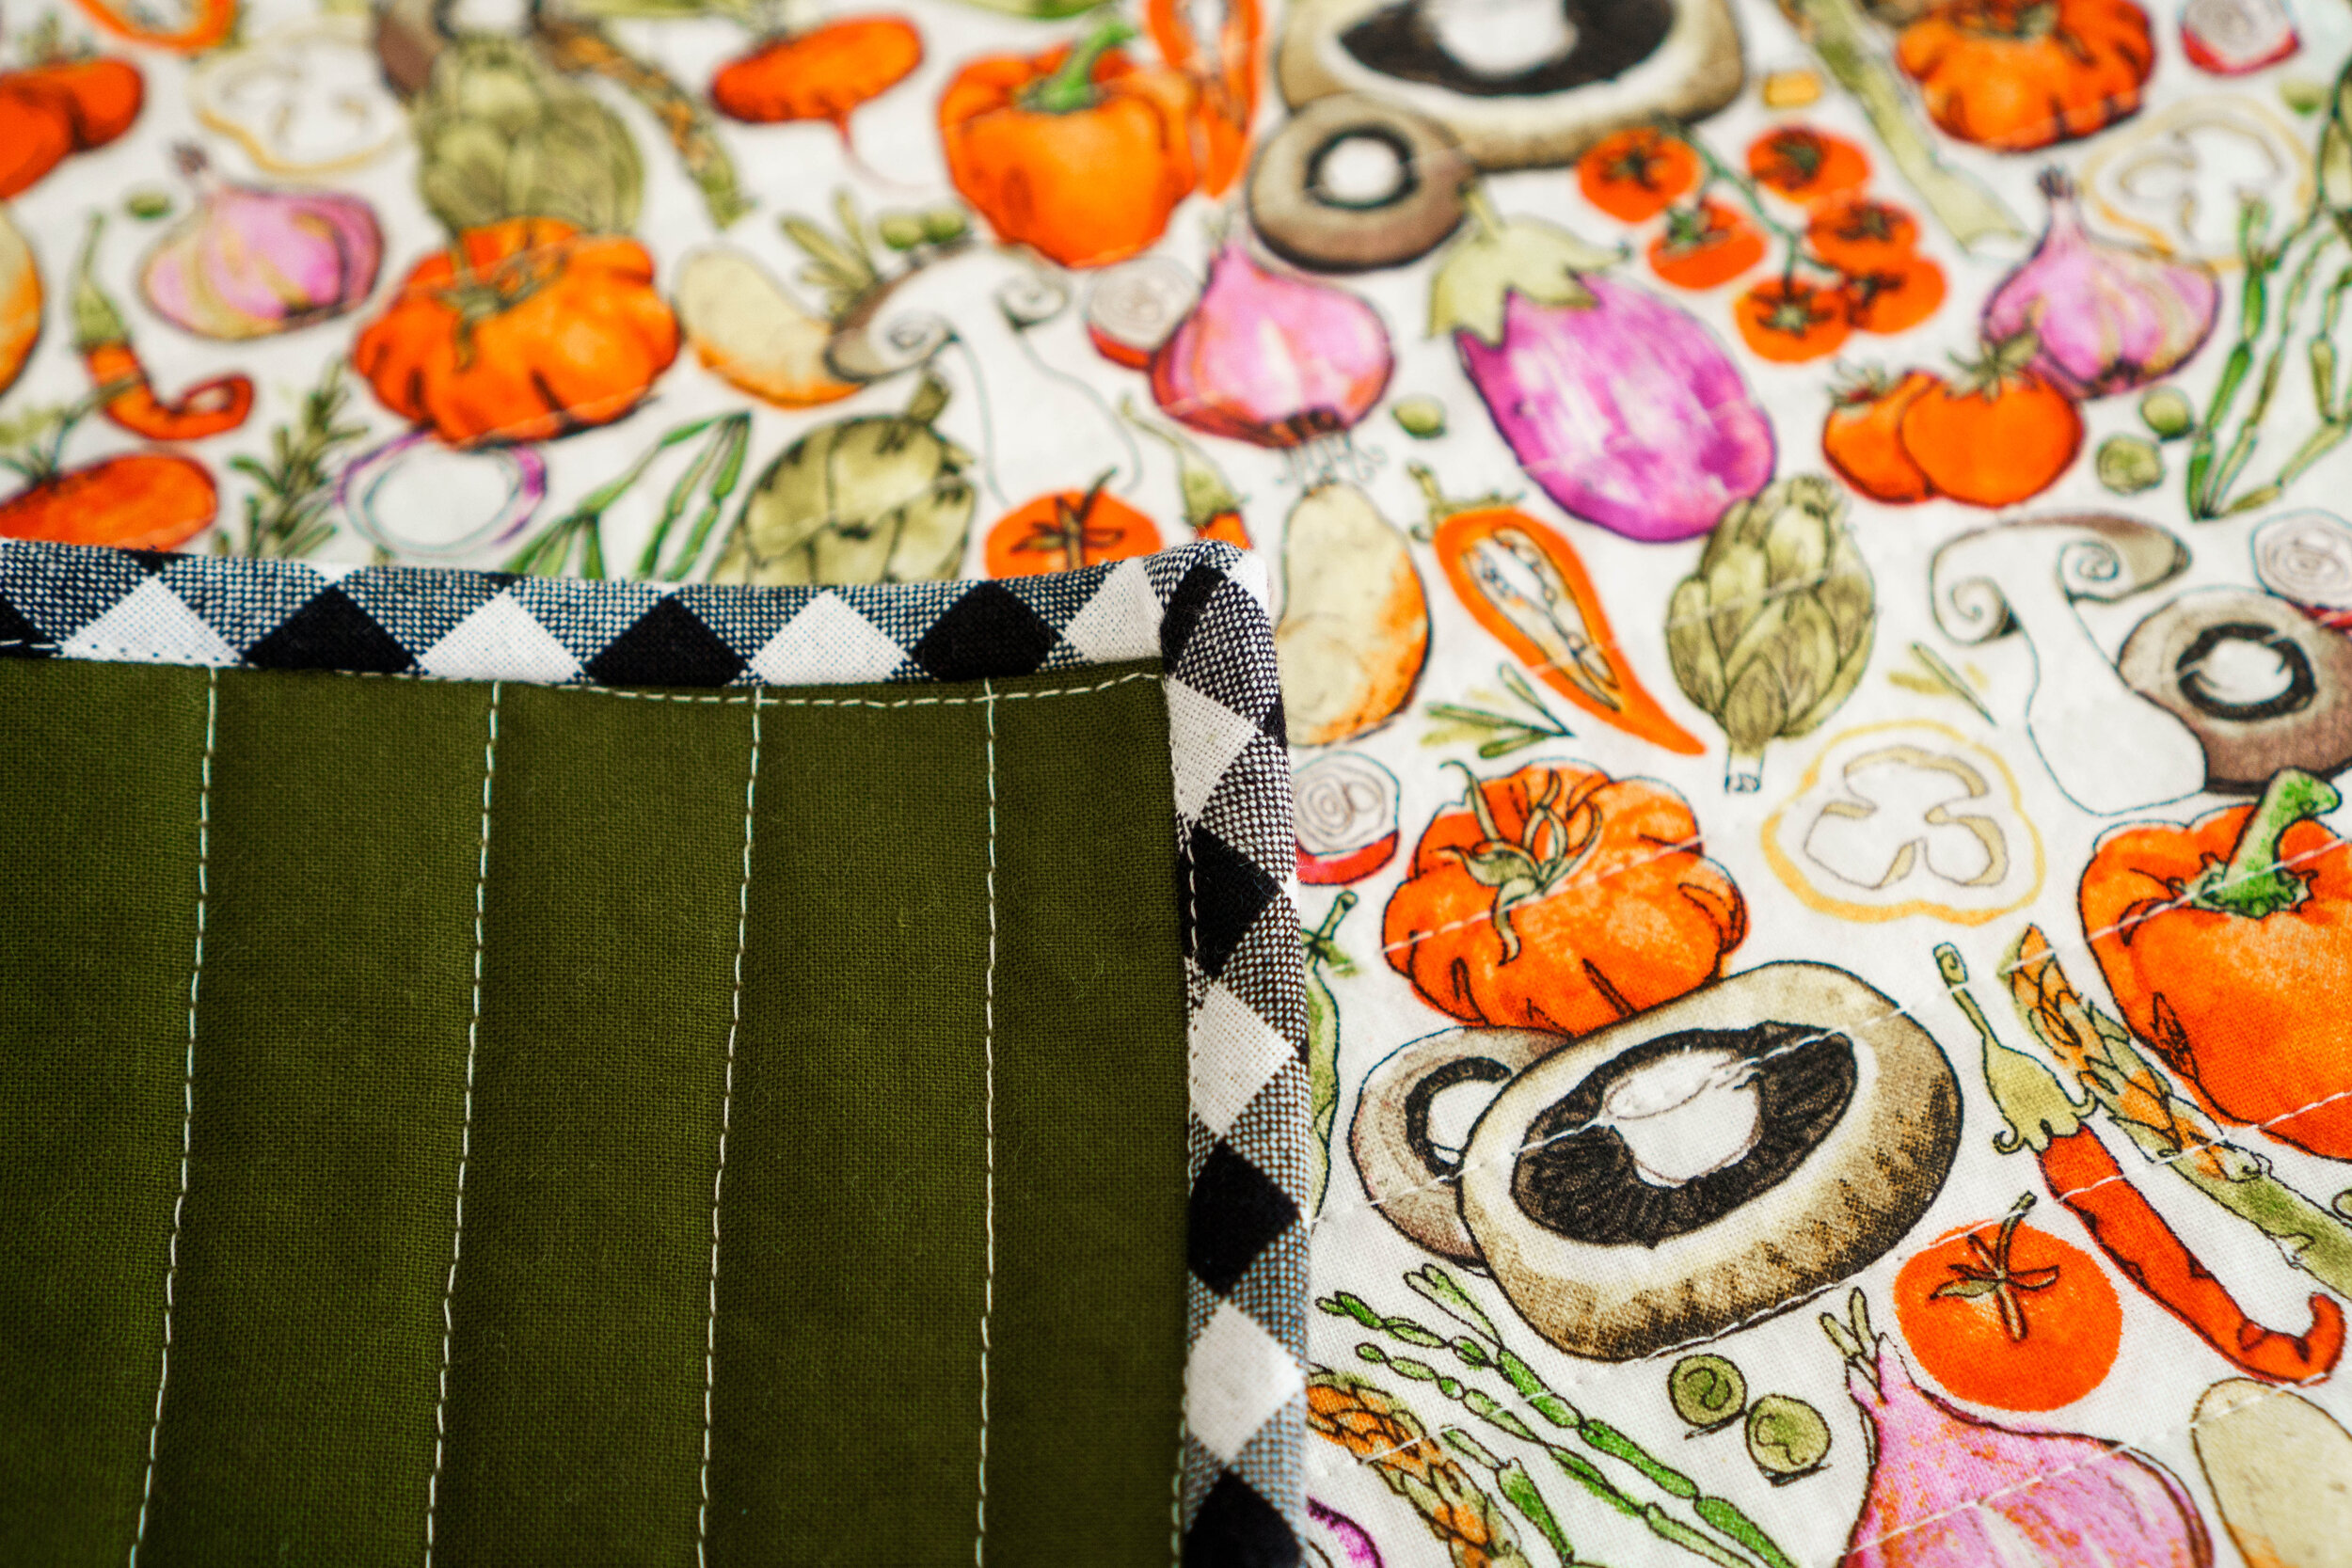 40+ Hot Pads You Can Sew For The Kitchen – Sewing